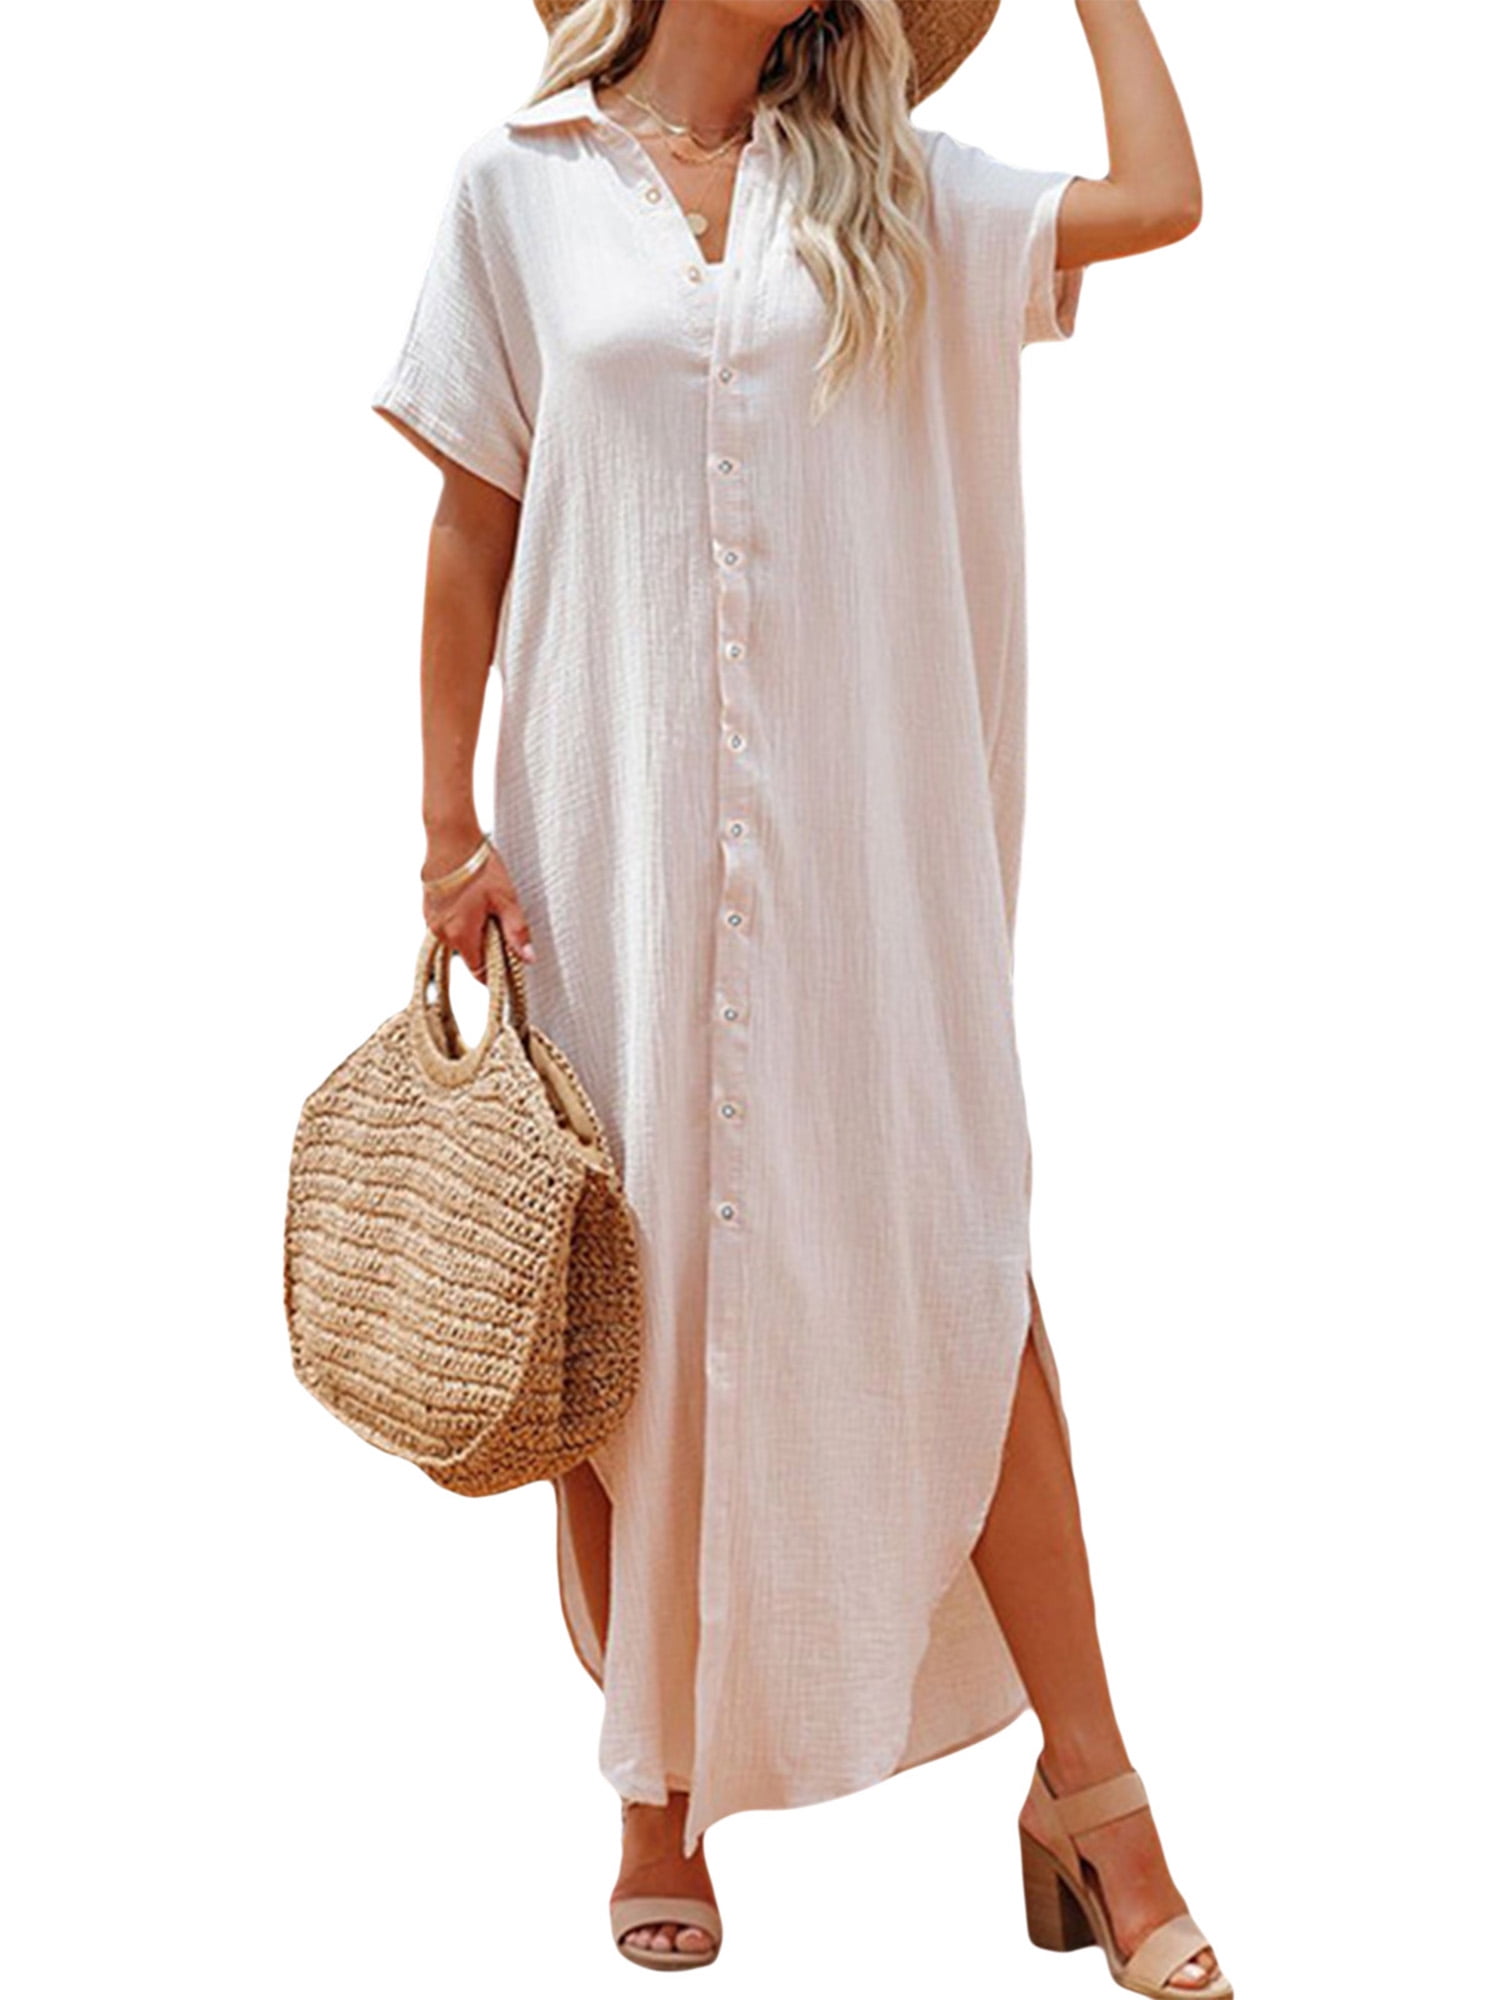 Cutiefox Women's Short Sleeve Button Down Shirts Dress Side Split Long Kimonos Cardigans Swimsuit Cover Ups with Belted 